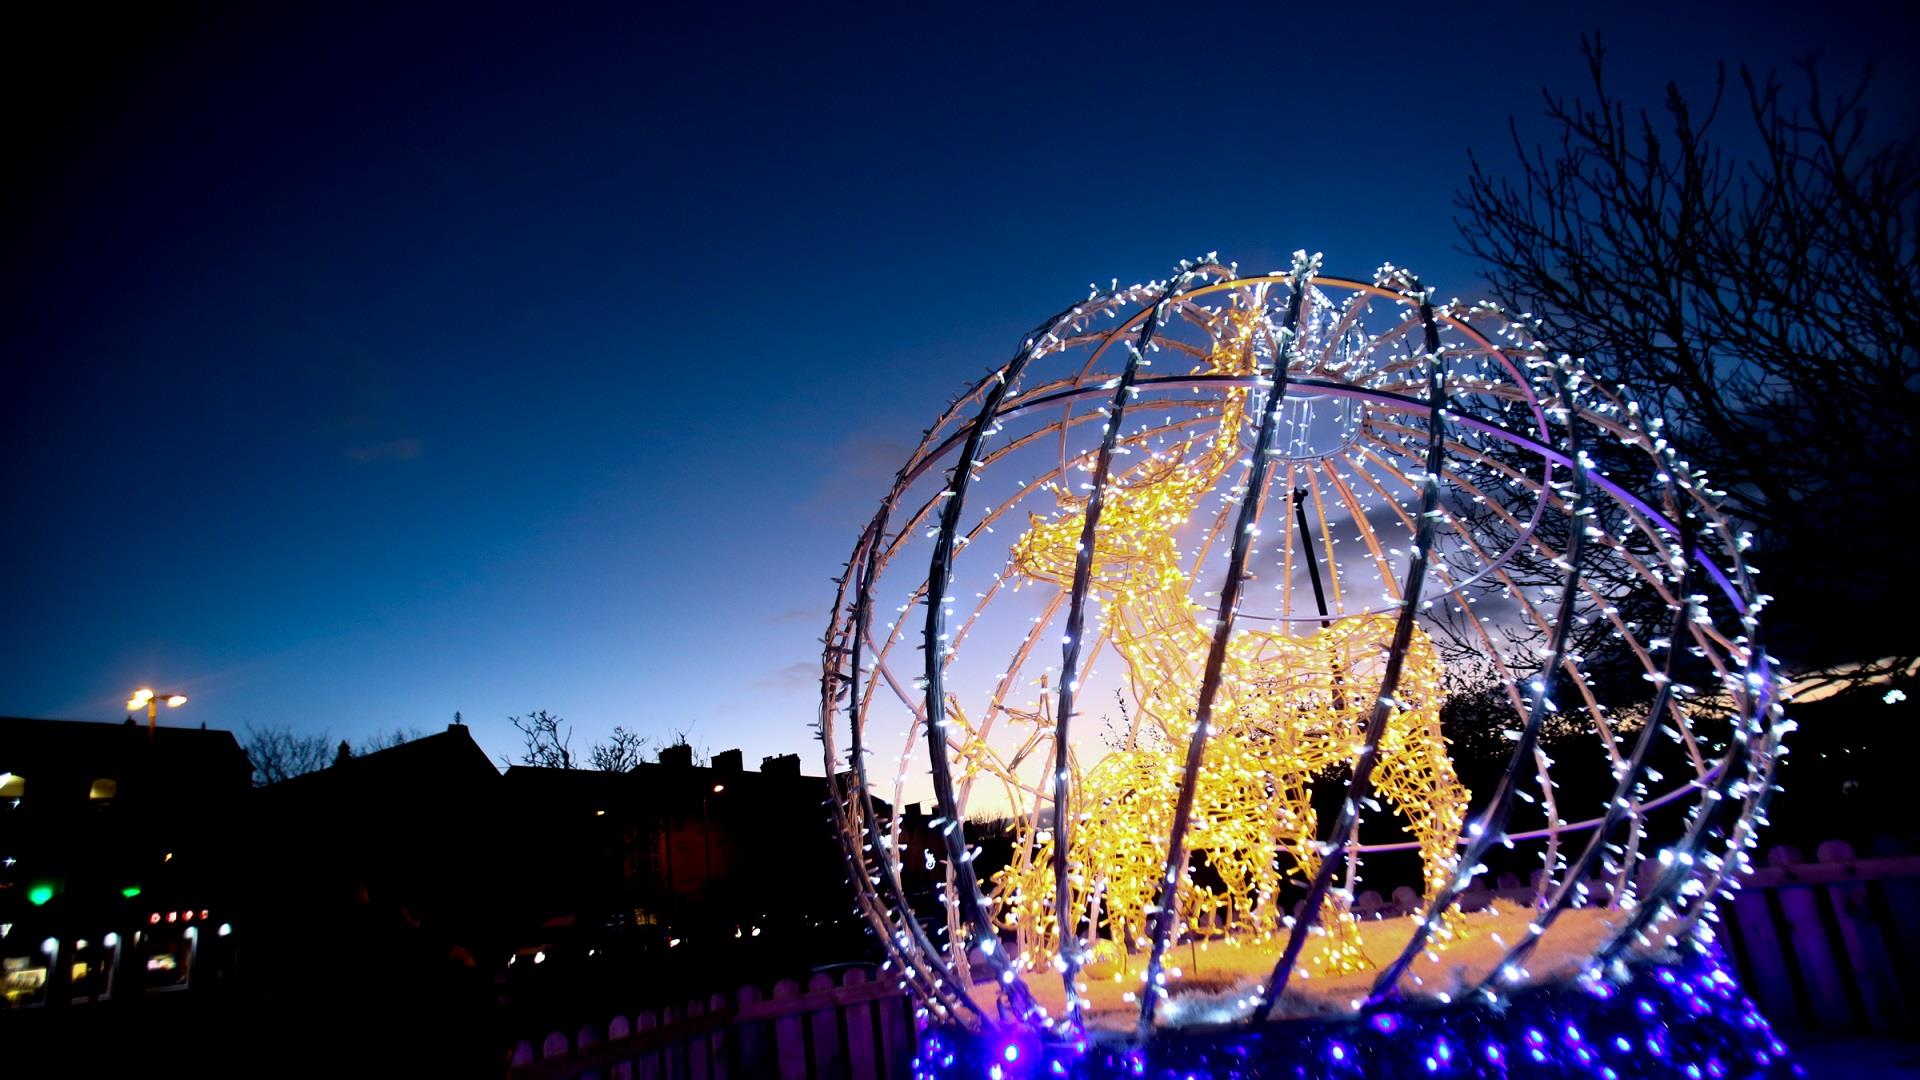 Photograph of Christmas decor in Bangor of a Reindeer and its young lit up within a globe of fairy lights